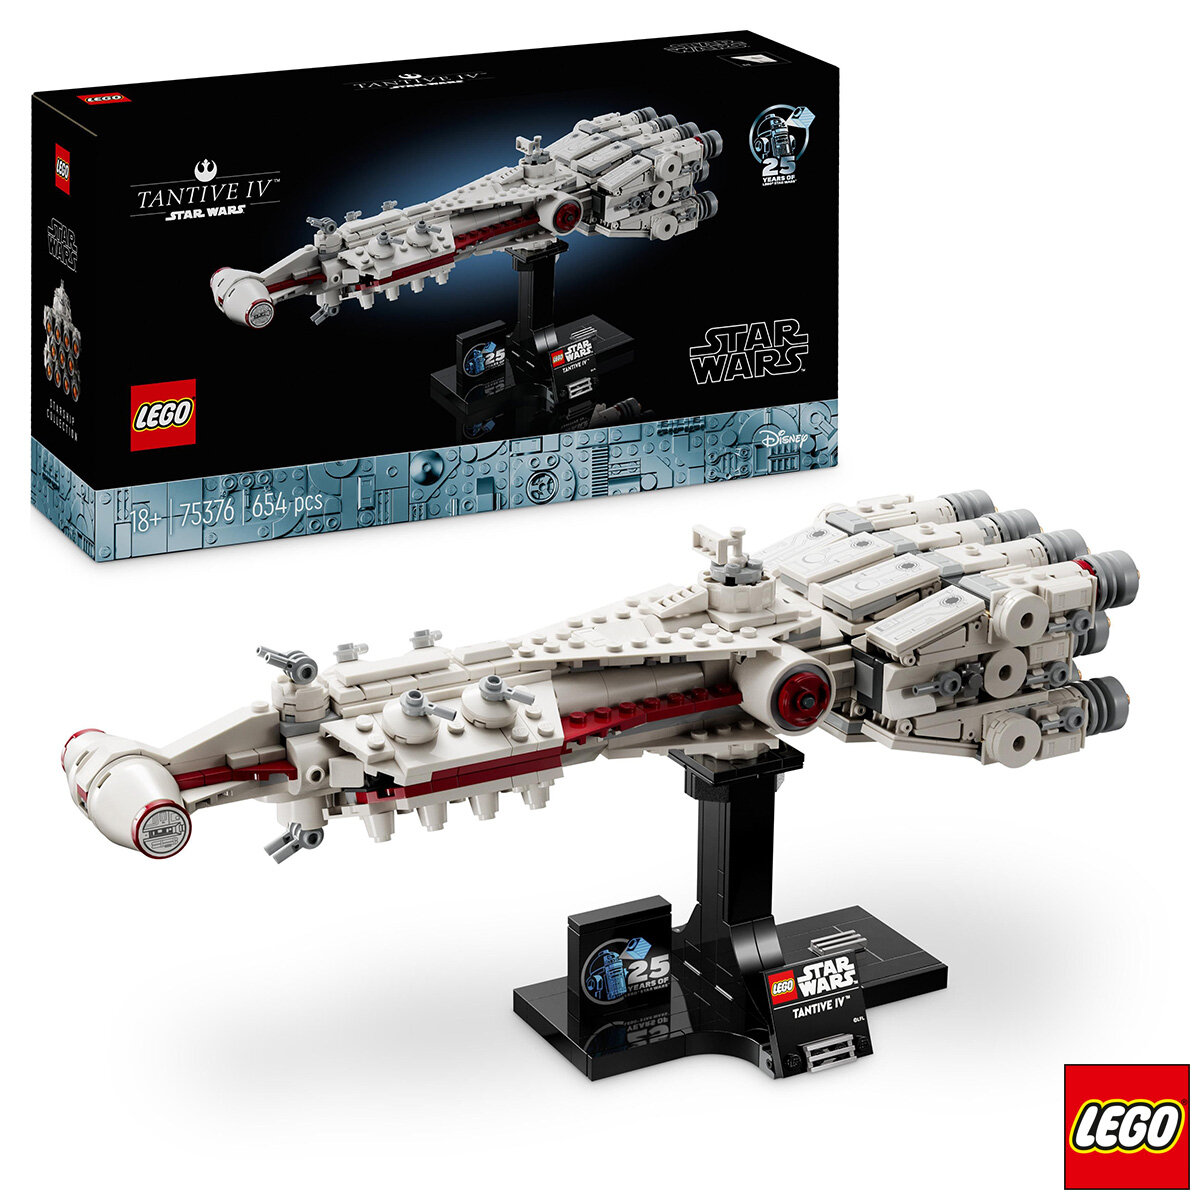 Buy LEGO Star Wars A New Hope Box & Item Image at Costco.co.uk